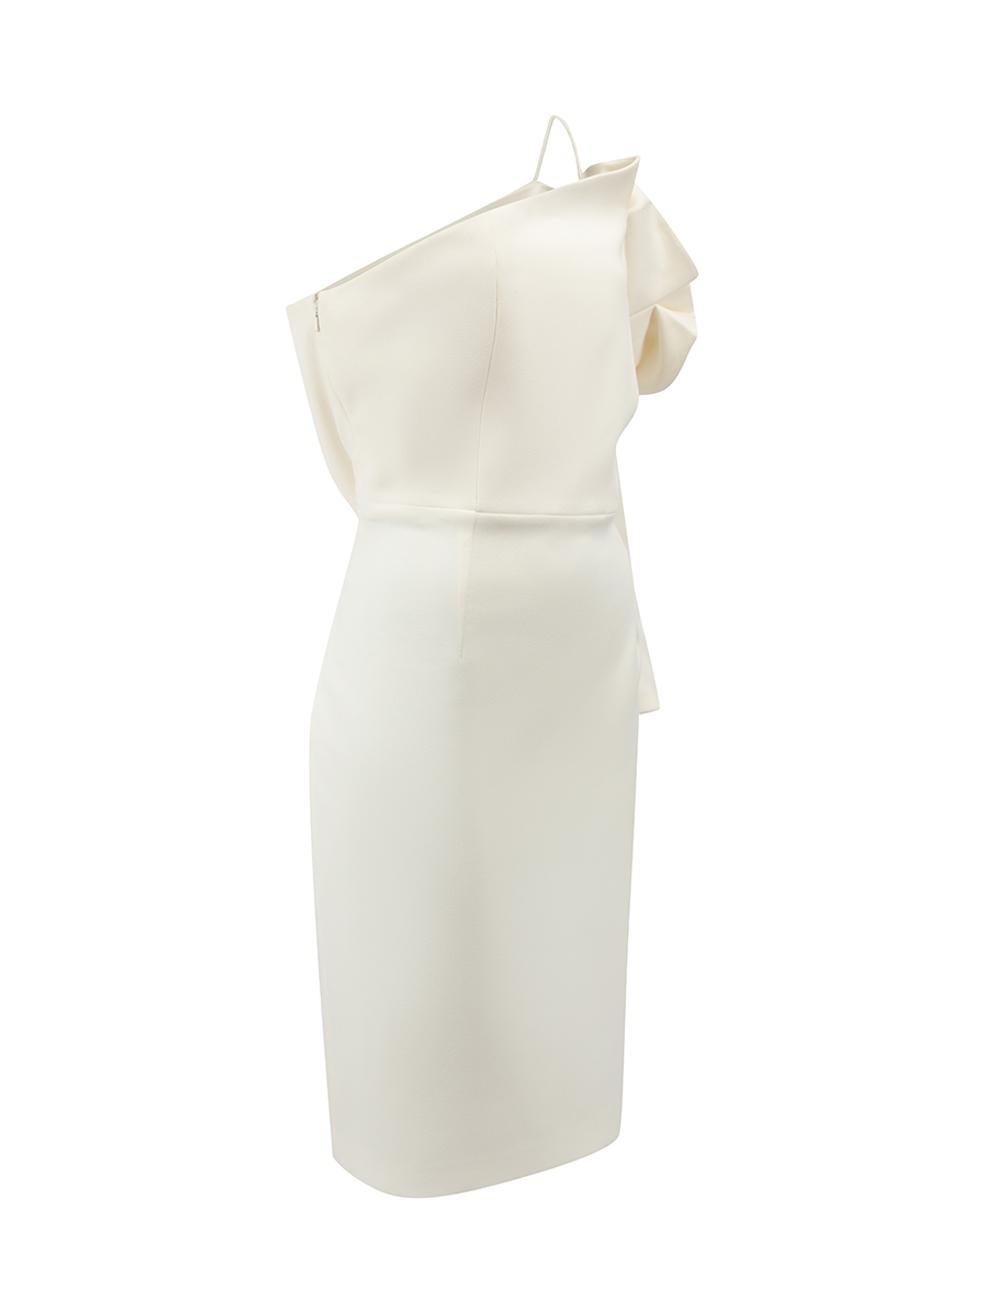 CONDITION is Very good. Minimal wear to dress is evident. Minimal wear to sleeve with faint mark due to poor storage on this used Safiyaa designer resale item.



Details


Cream

Polyester

Mini dress

One shoulder

Side zip closure with hook and